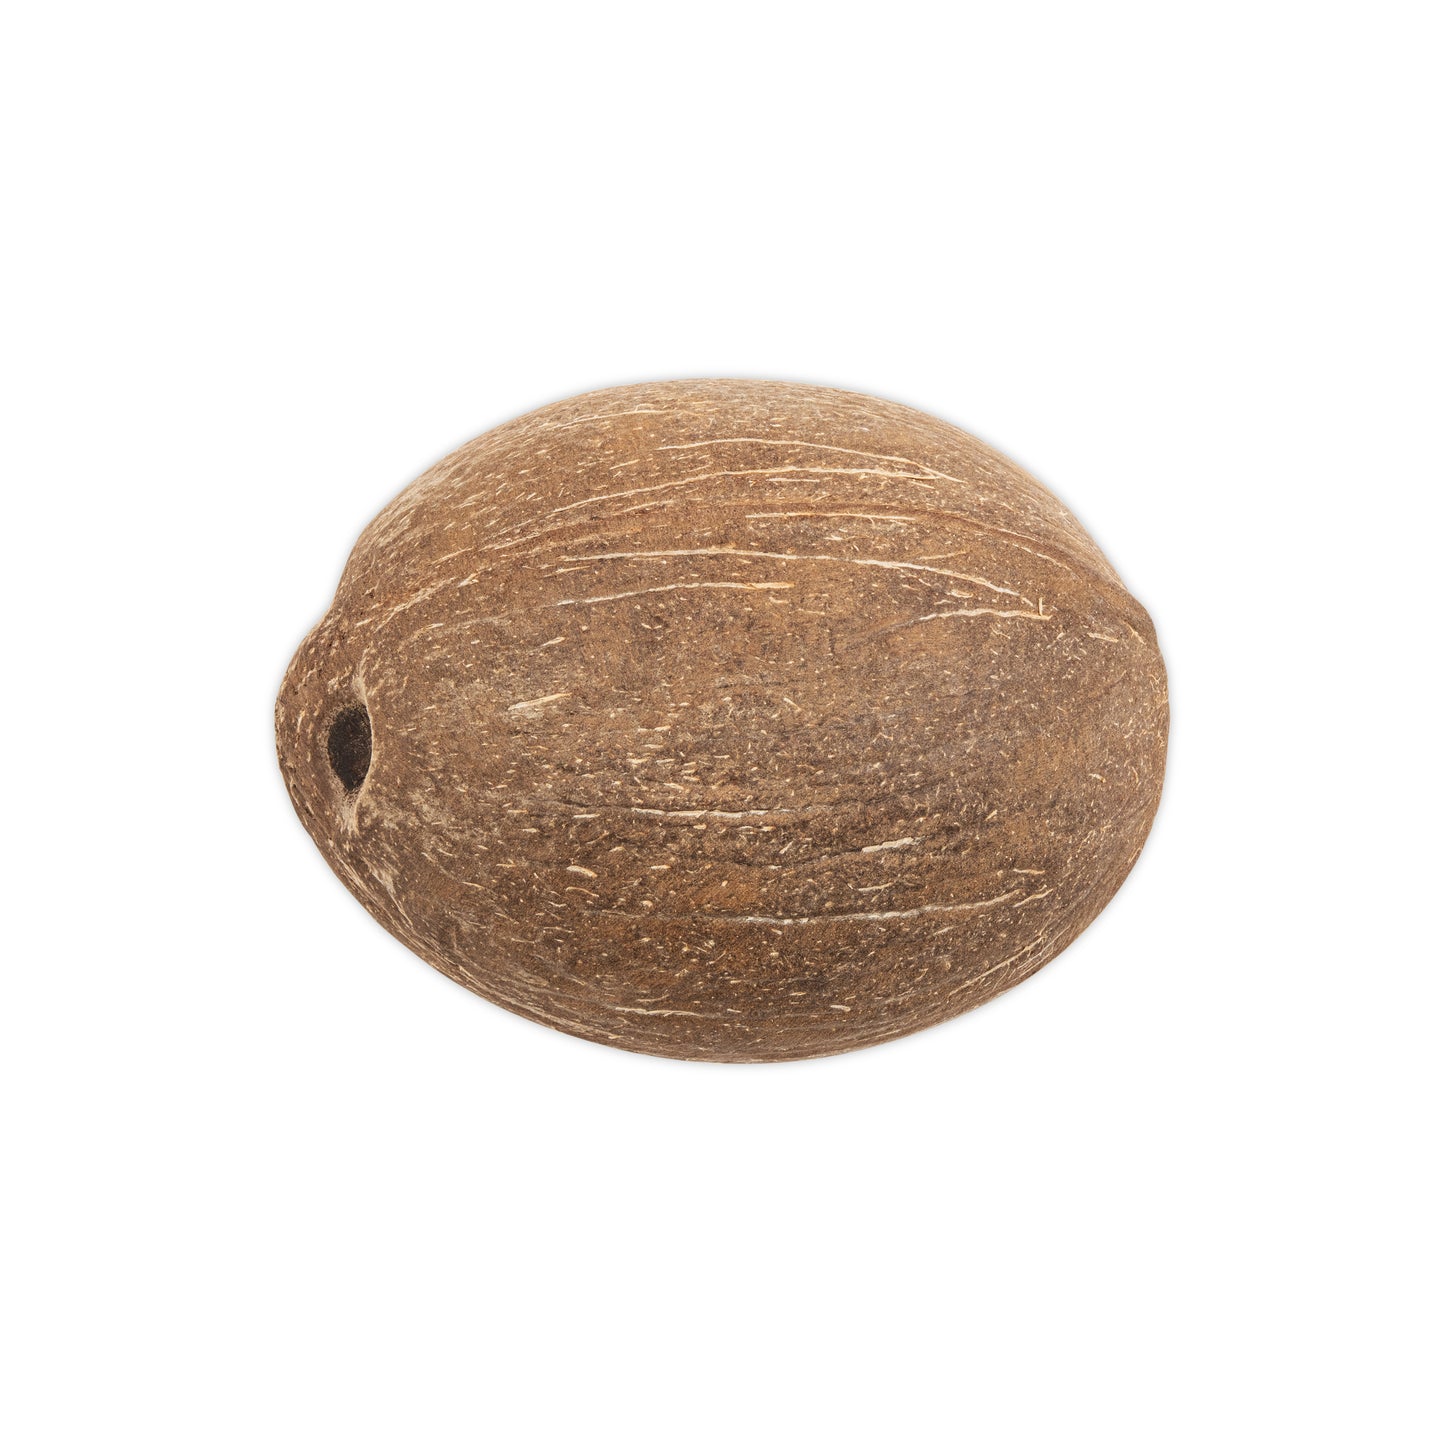 coconut shell all natural smooth round bottom